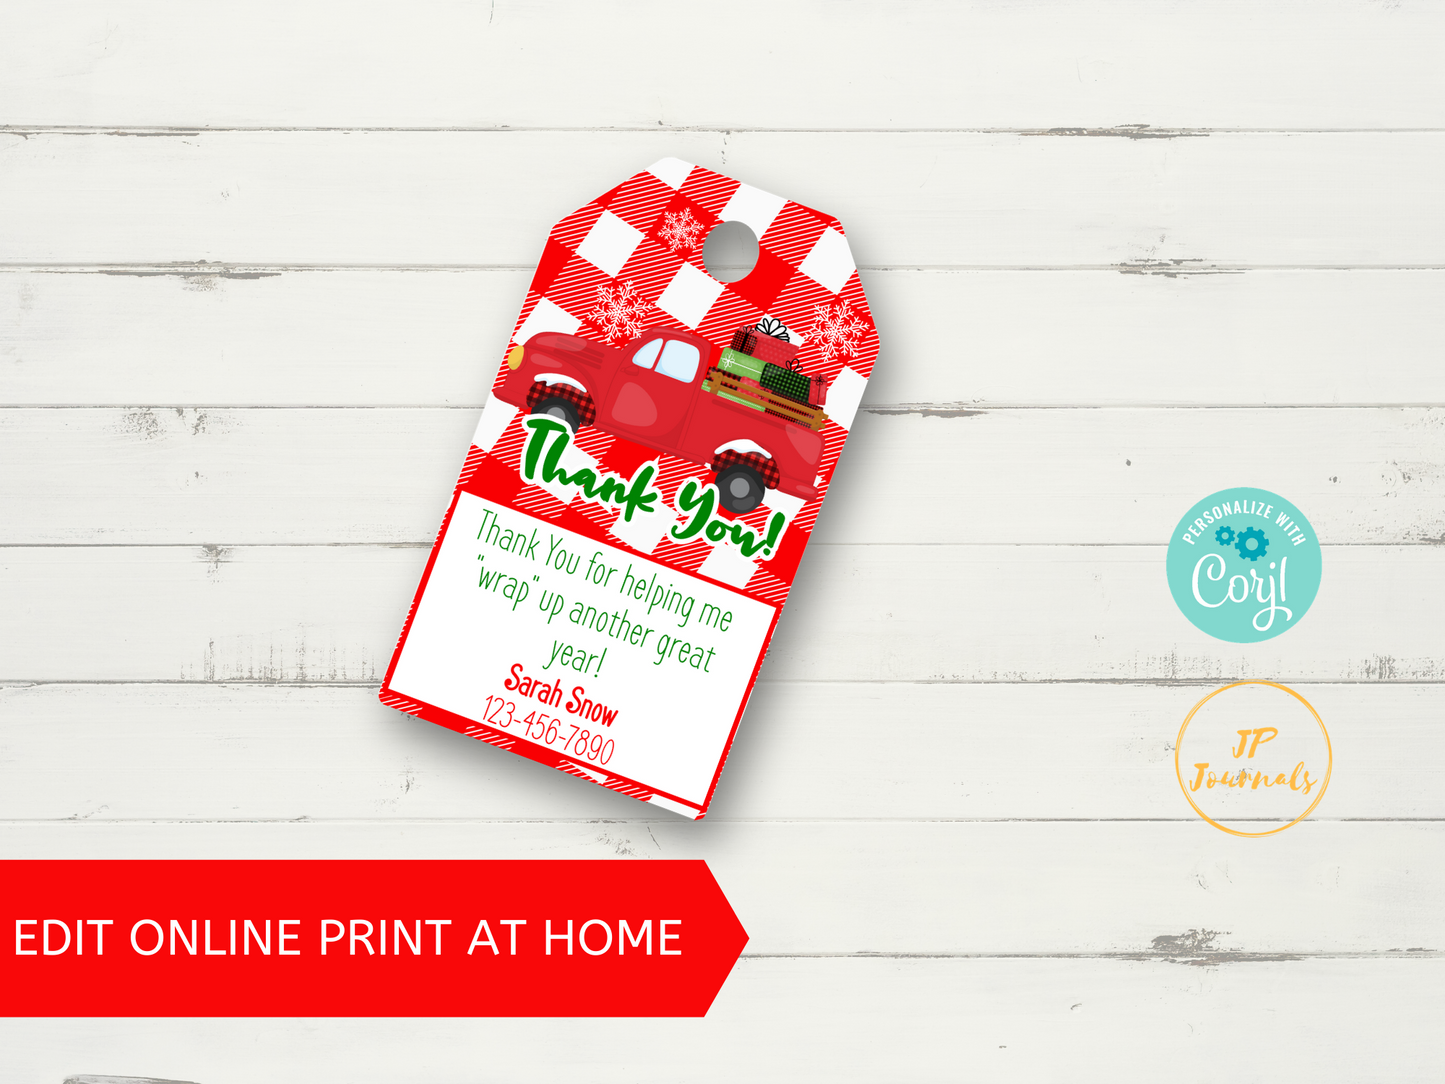 Real Estate Agent Marketing - Printable Gift Tags - Thank You for Wrapping Up - Christmas Client Gift Tags - Business Marketing